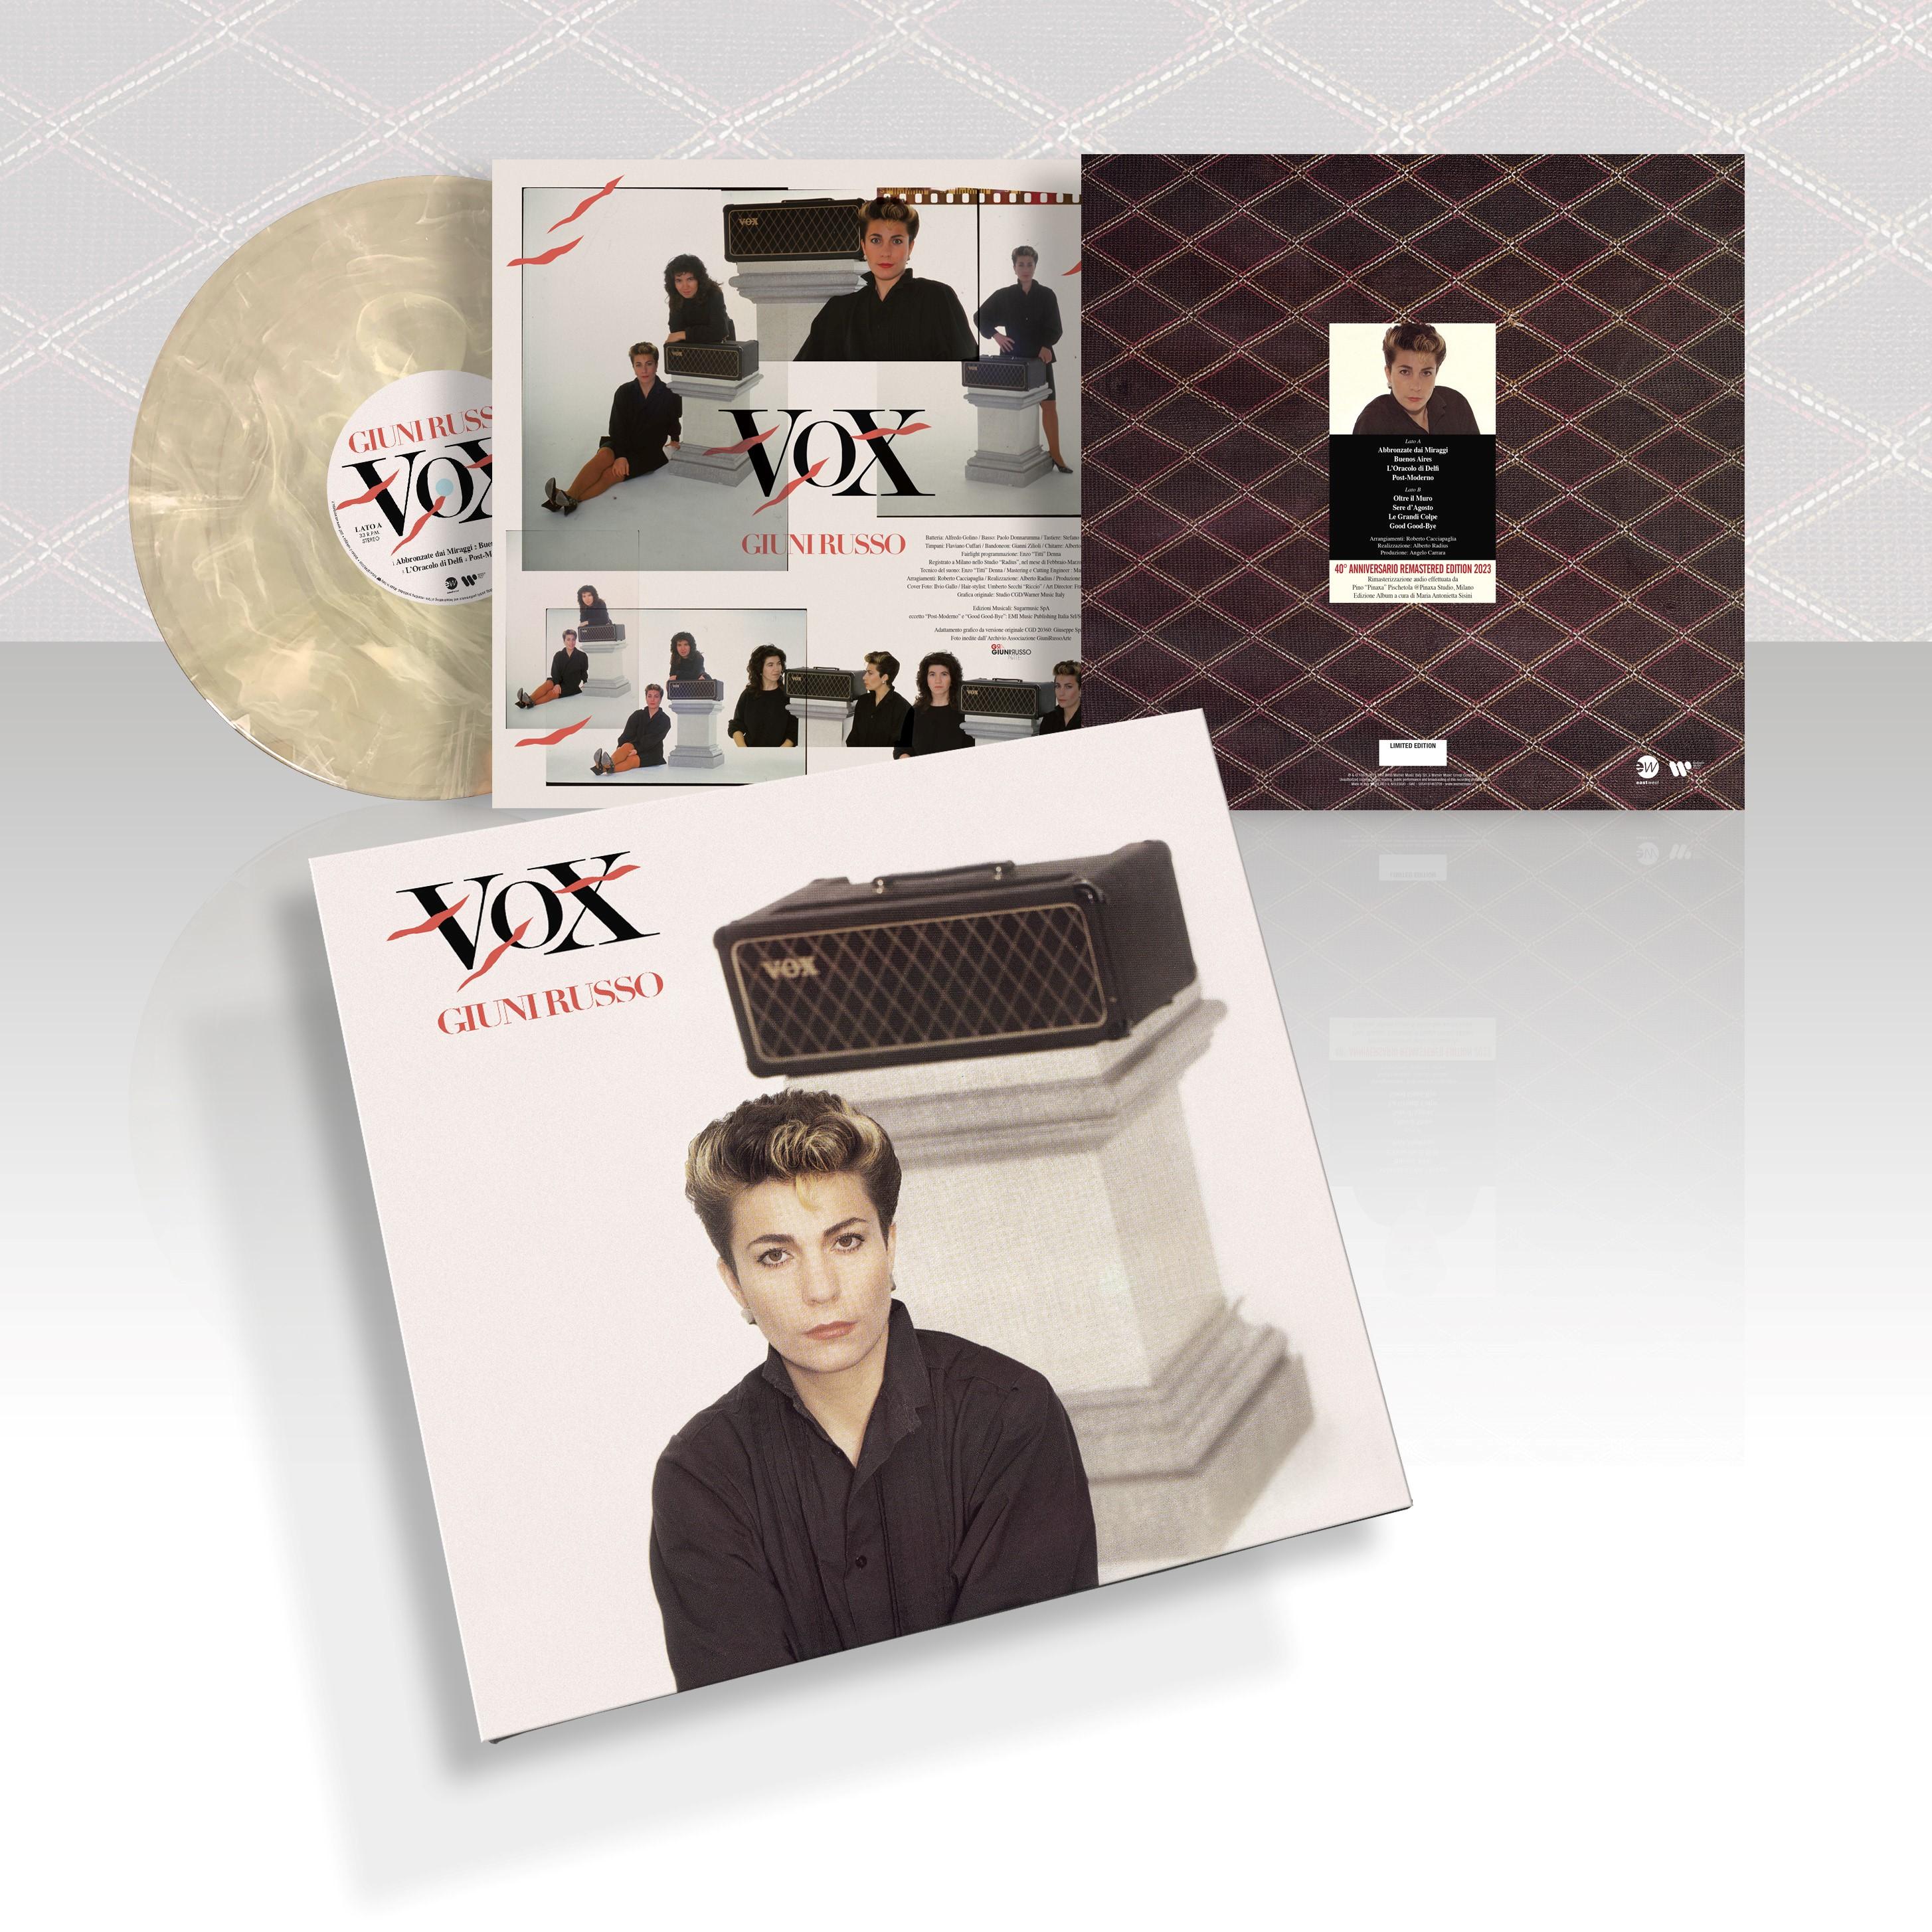 VOX 40TH ANNIVERSARY LIMITED MARBLED VINYL EDITION